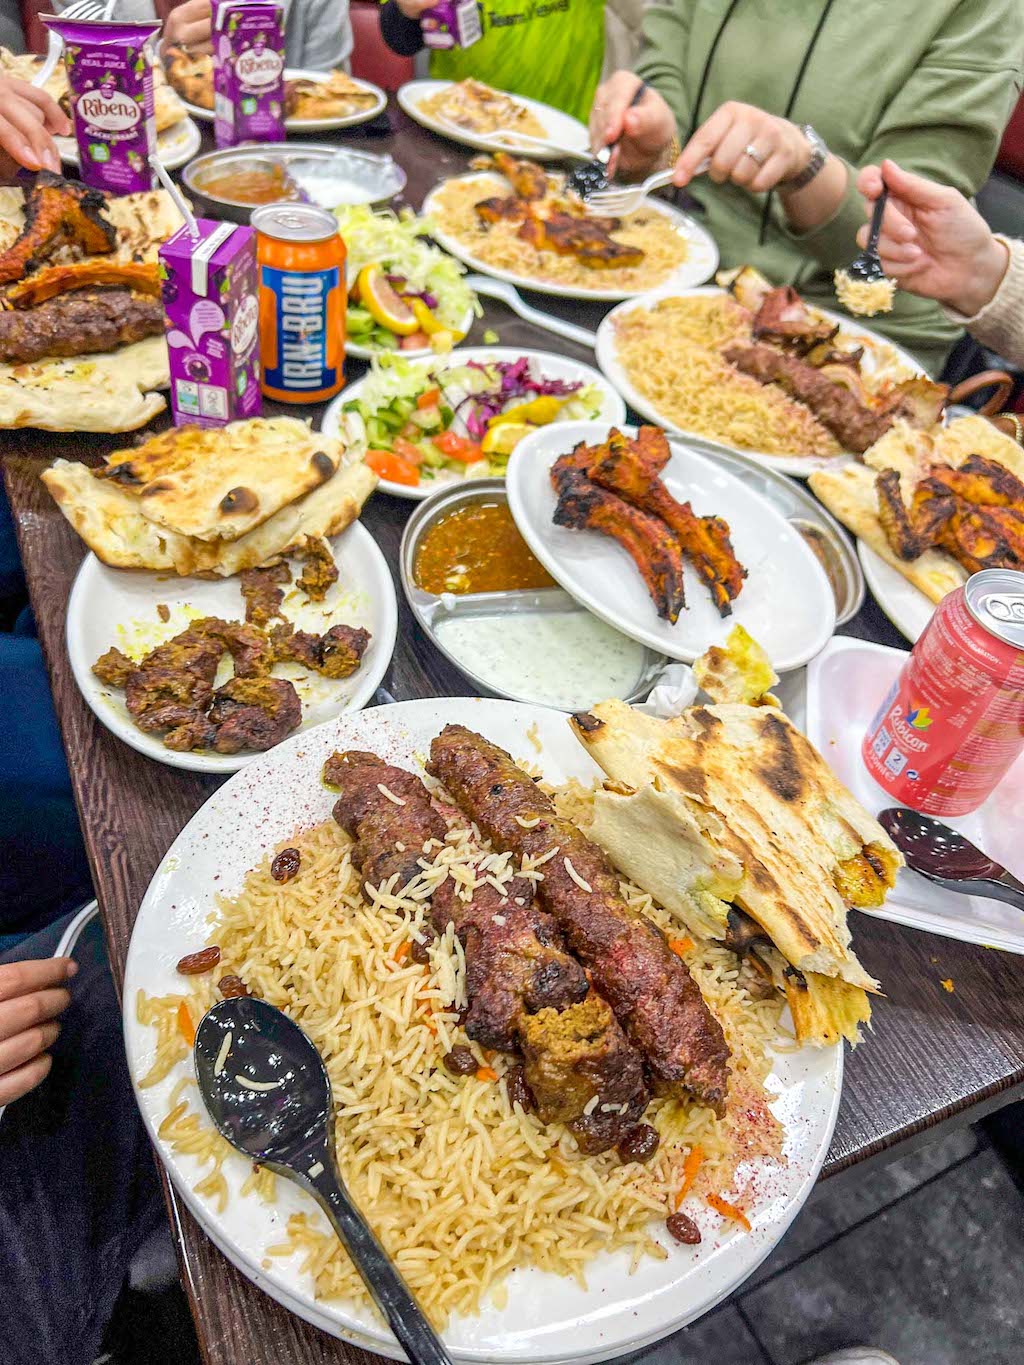 halal restaurants in manchester, table full of food Fromm Afghan Cuisine